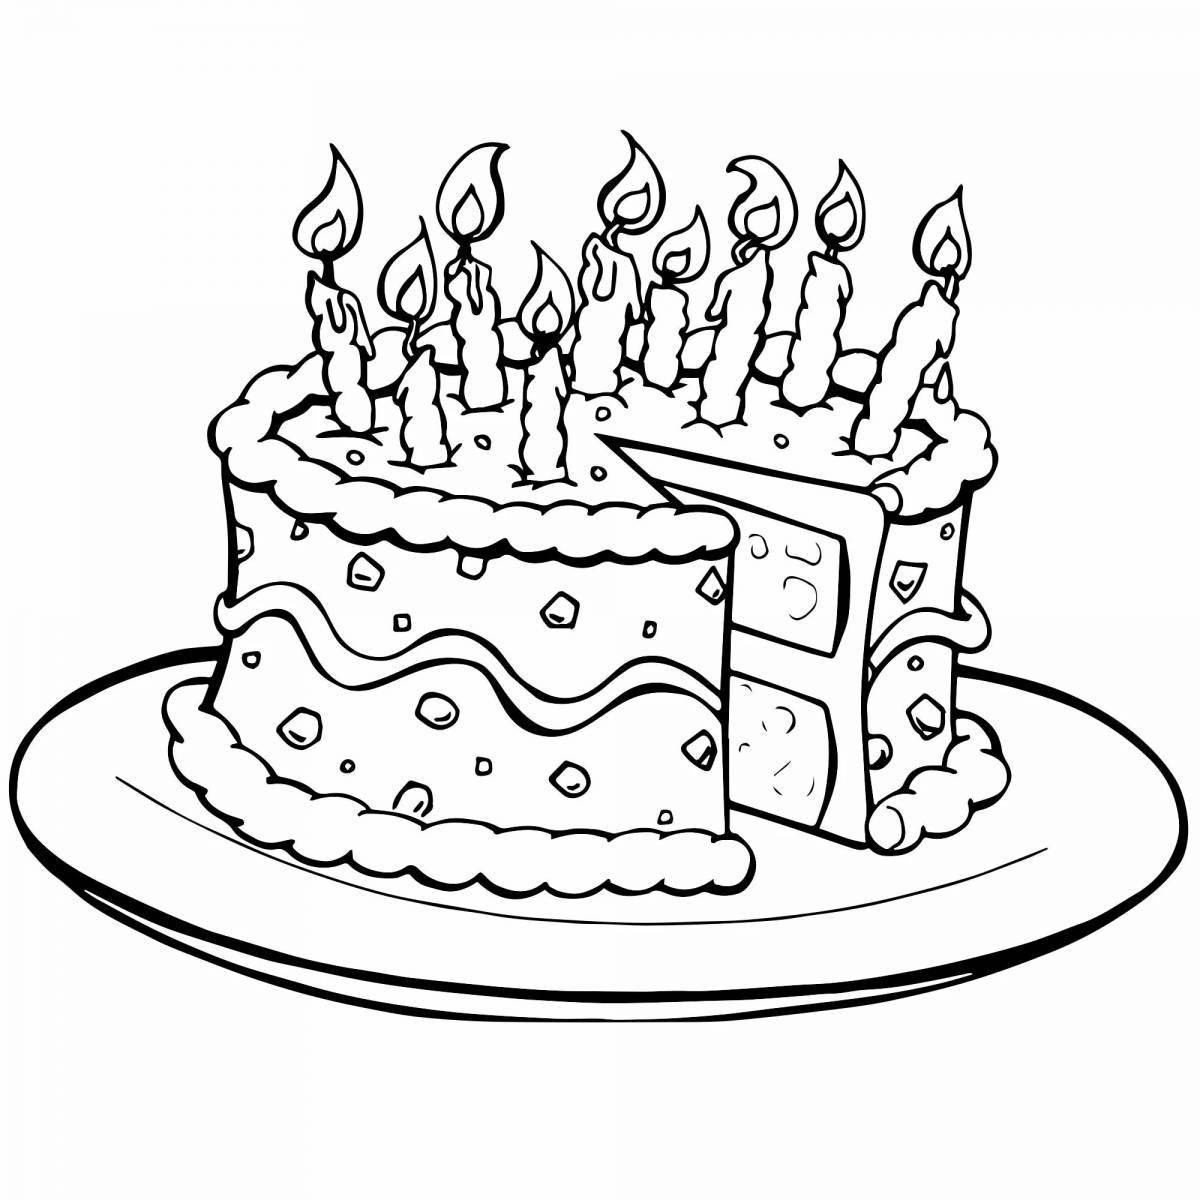 Bright beautiful cake coloring page